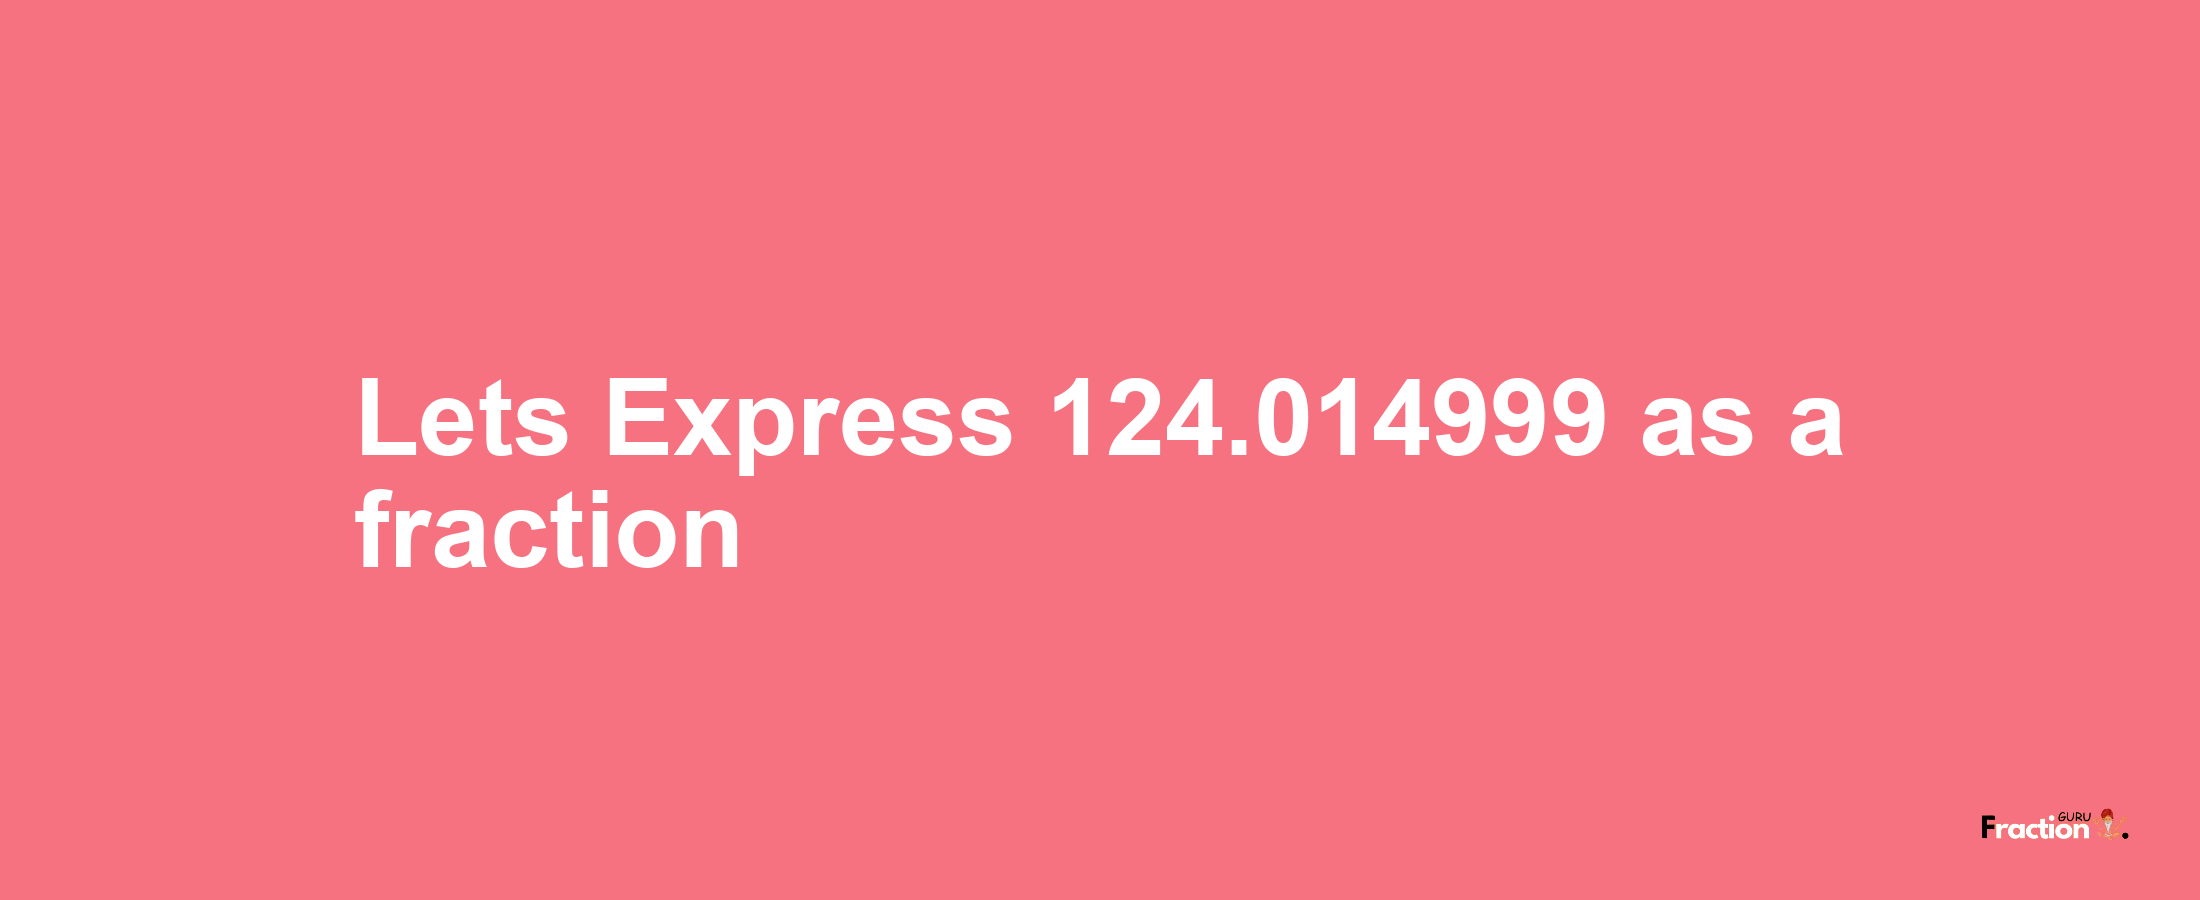 Lets Express 124.014999 as afraction